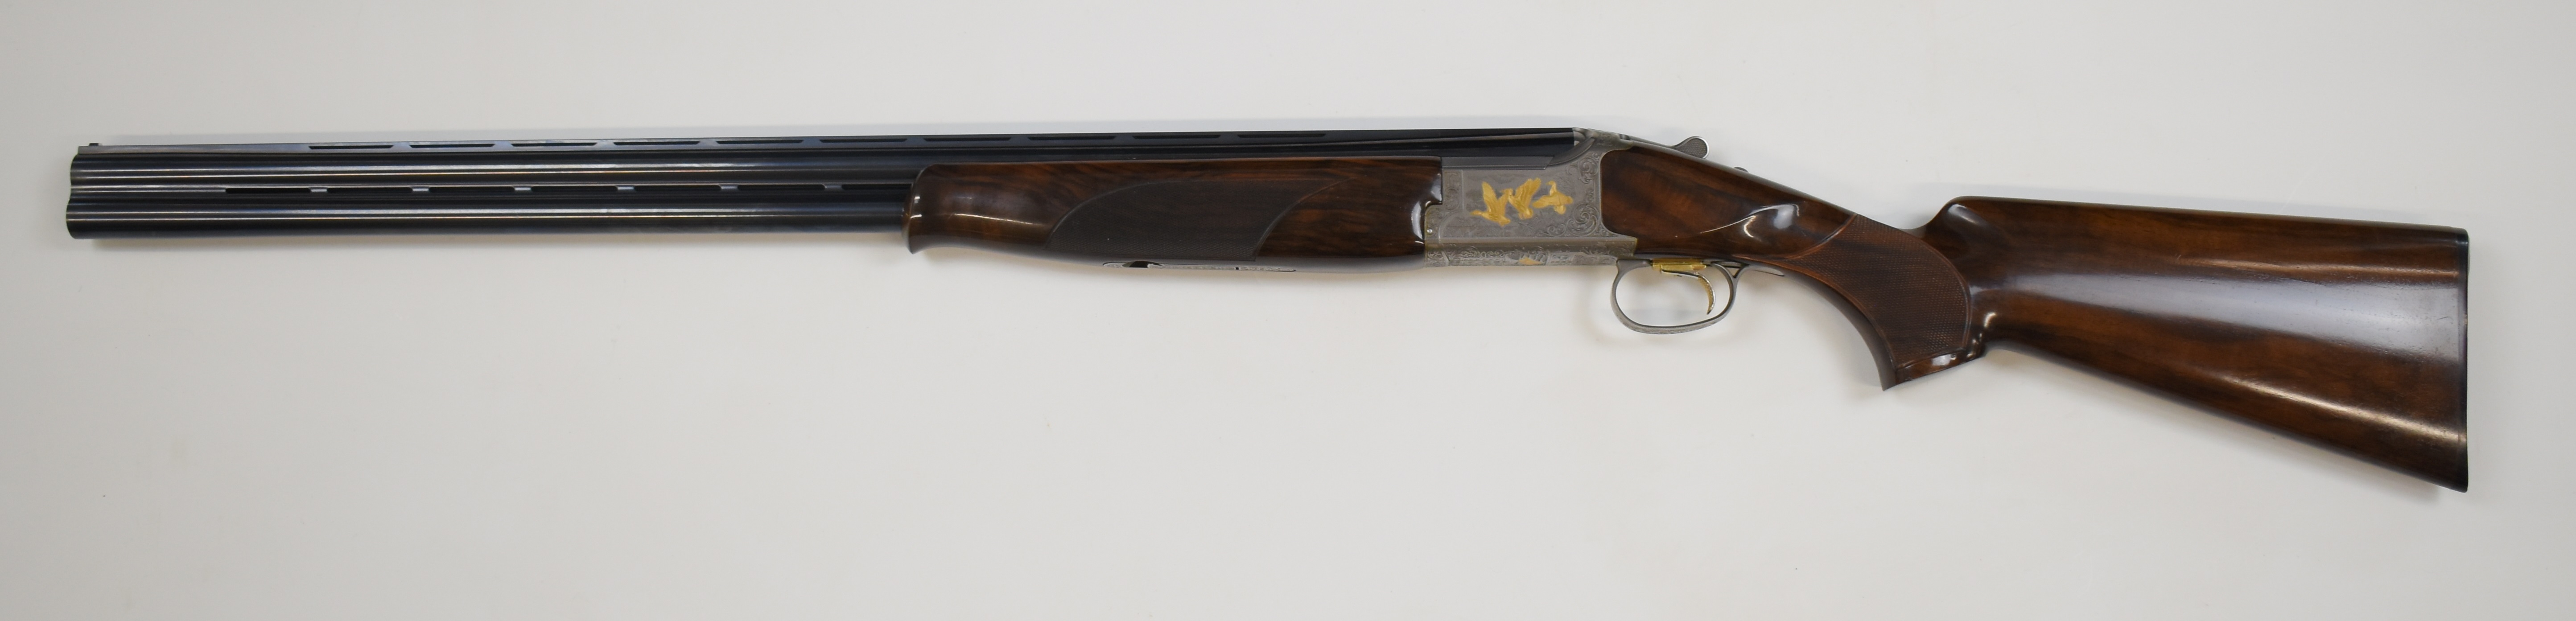 Browning B525 Ultimate 12 bore over and under ejector shotgun with gold engraving of birds - Image 9 of 12